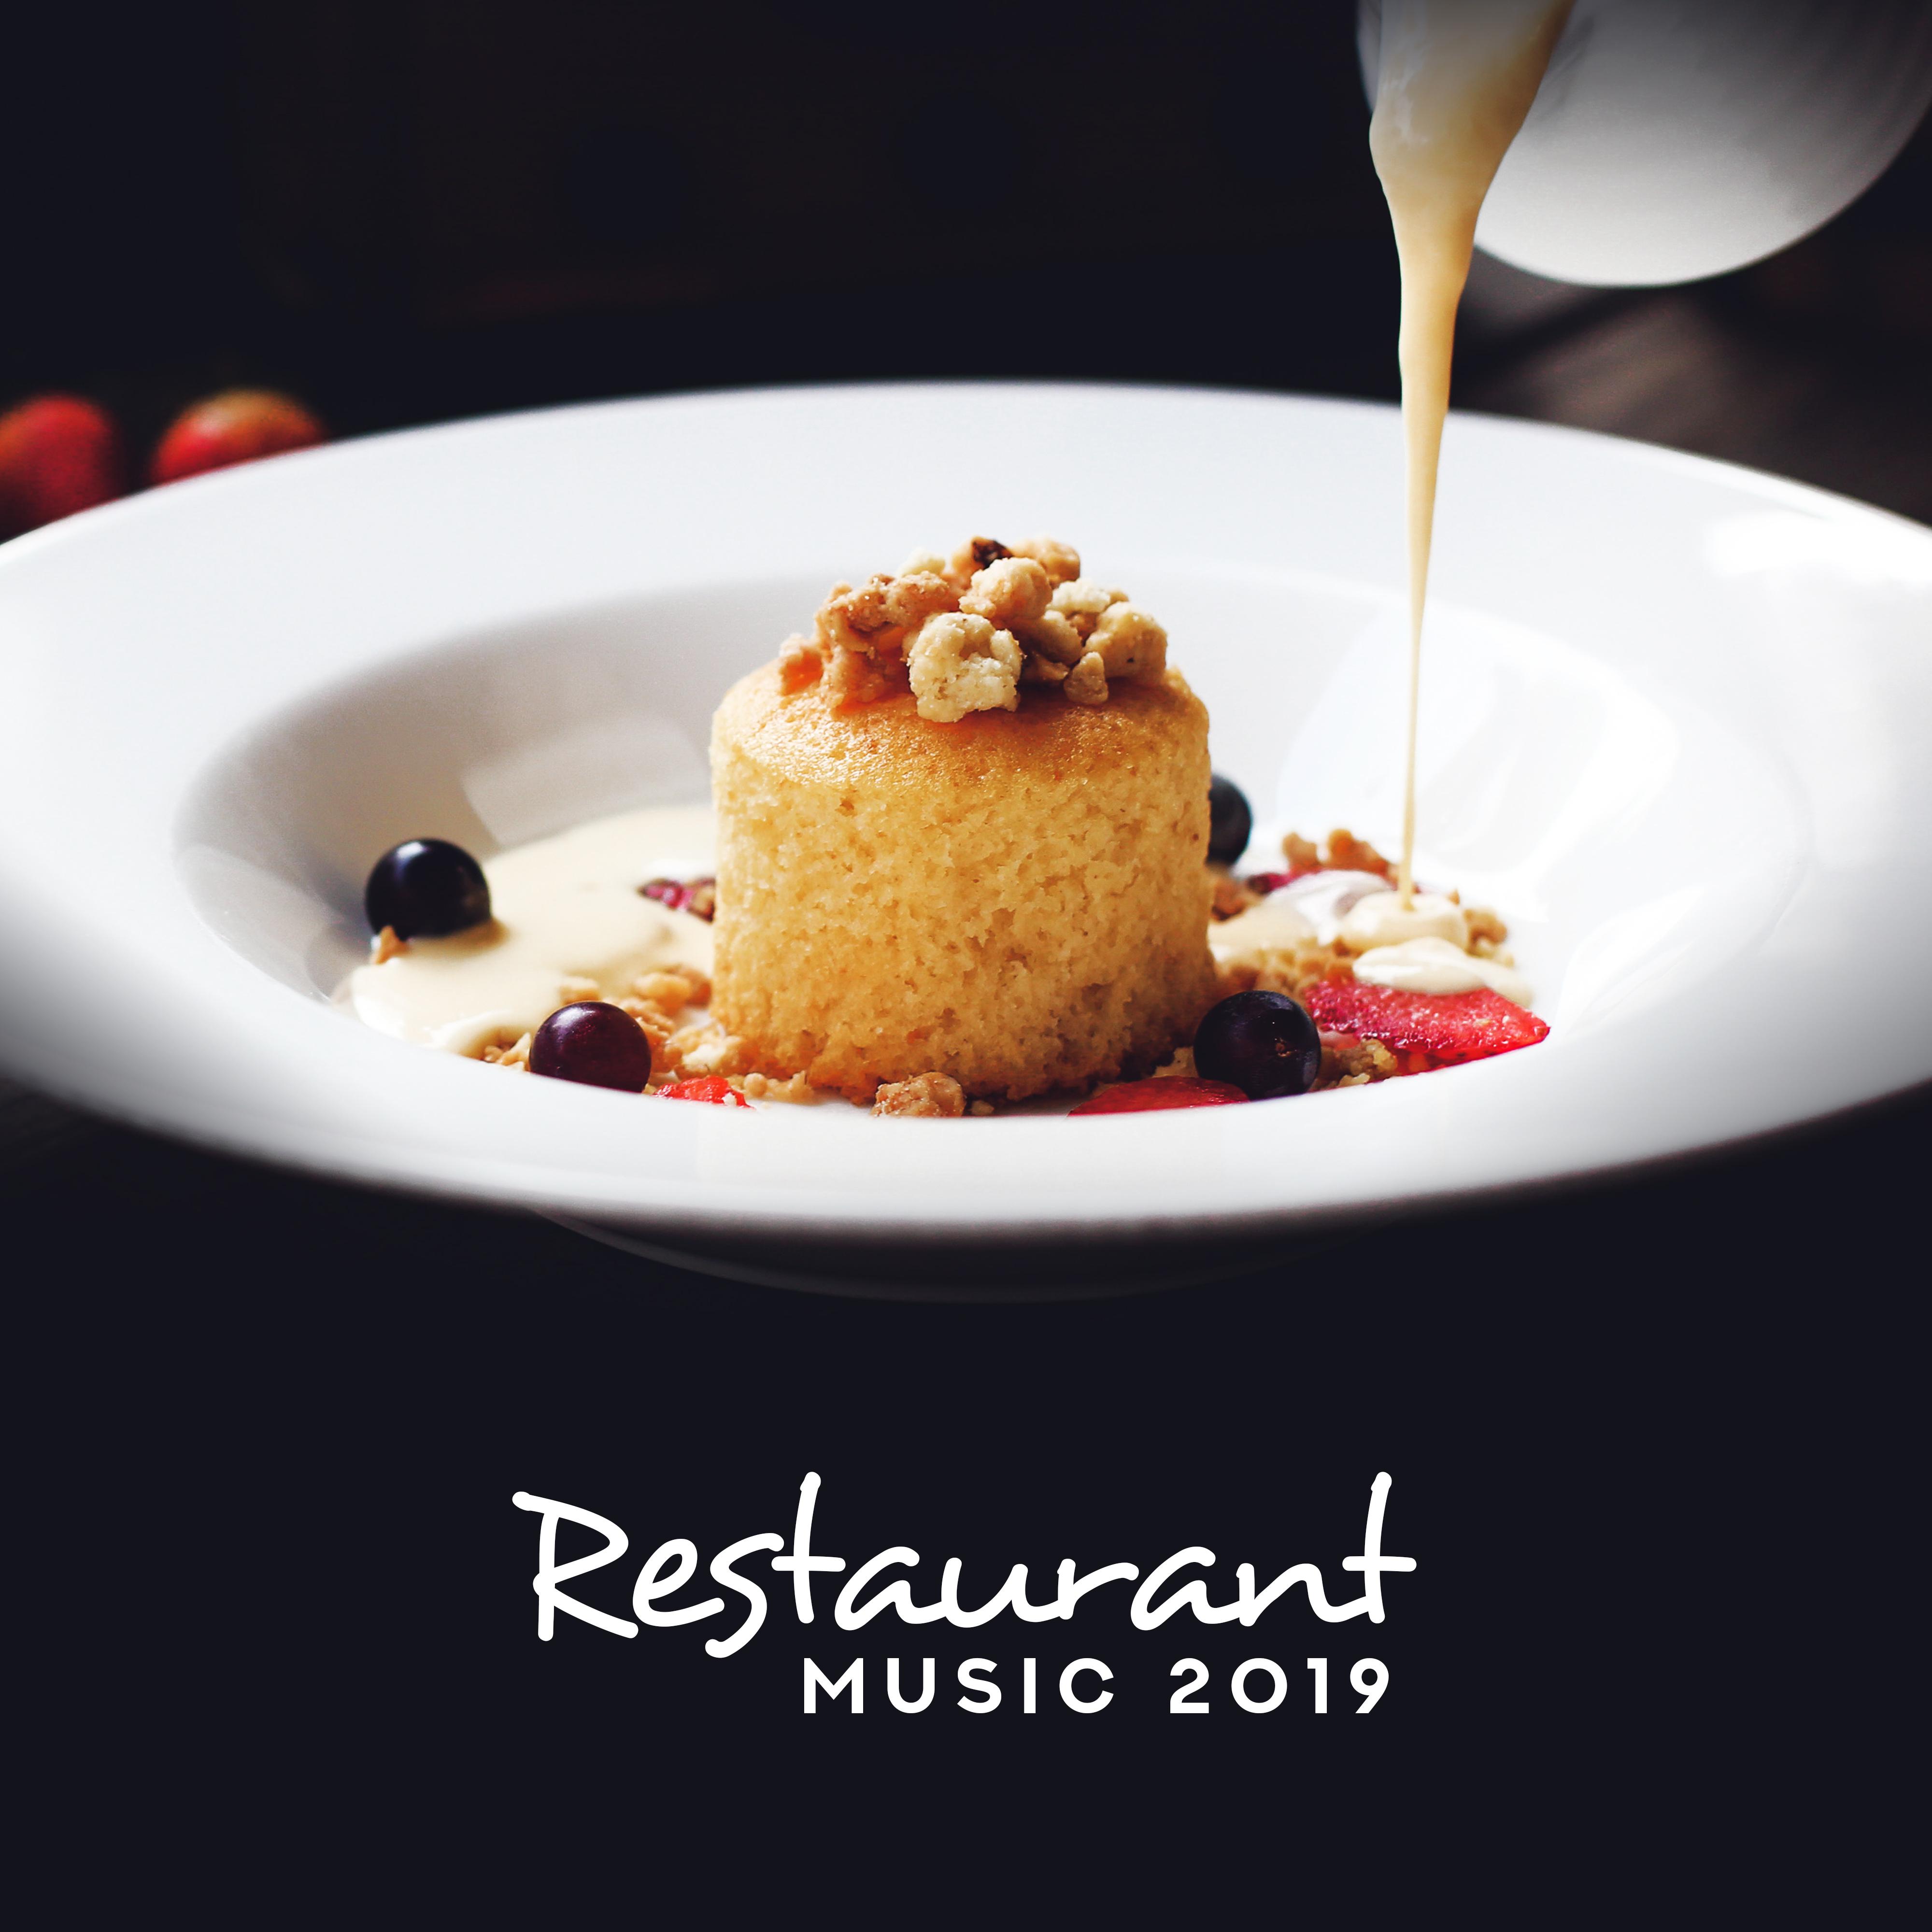 Restaurant Music 2019  Dinner Songs, Smooth Jazz for Relaxation, Rest, Relaxing Vibes, Piano Background, Jazz Relaxation